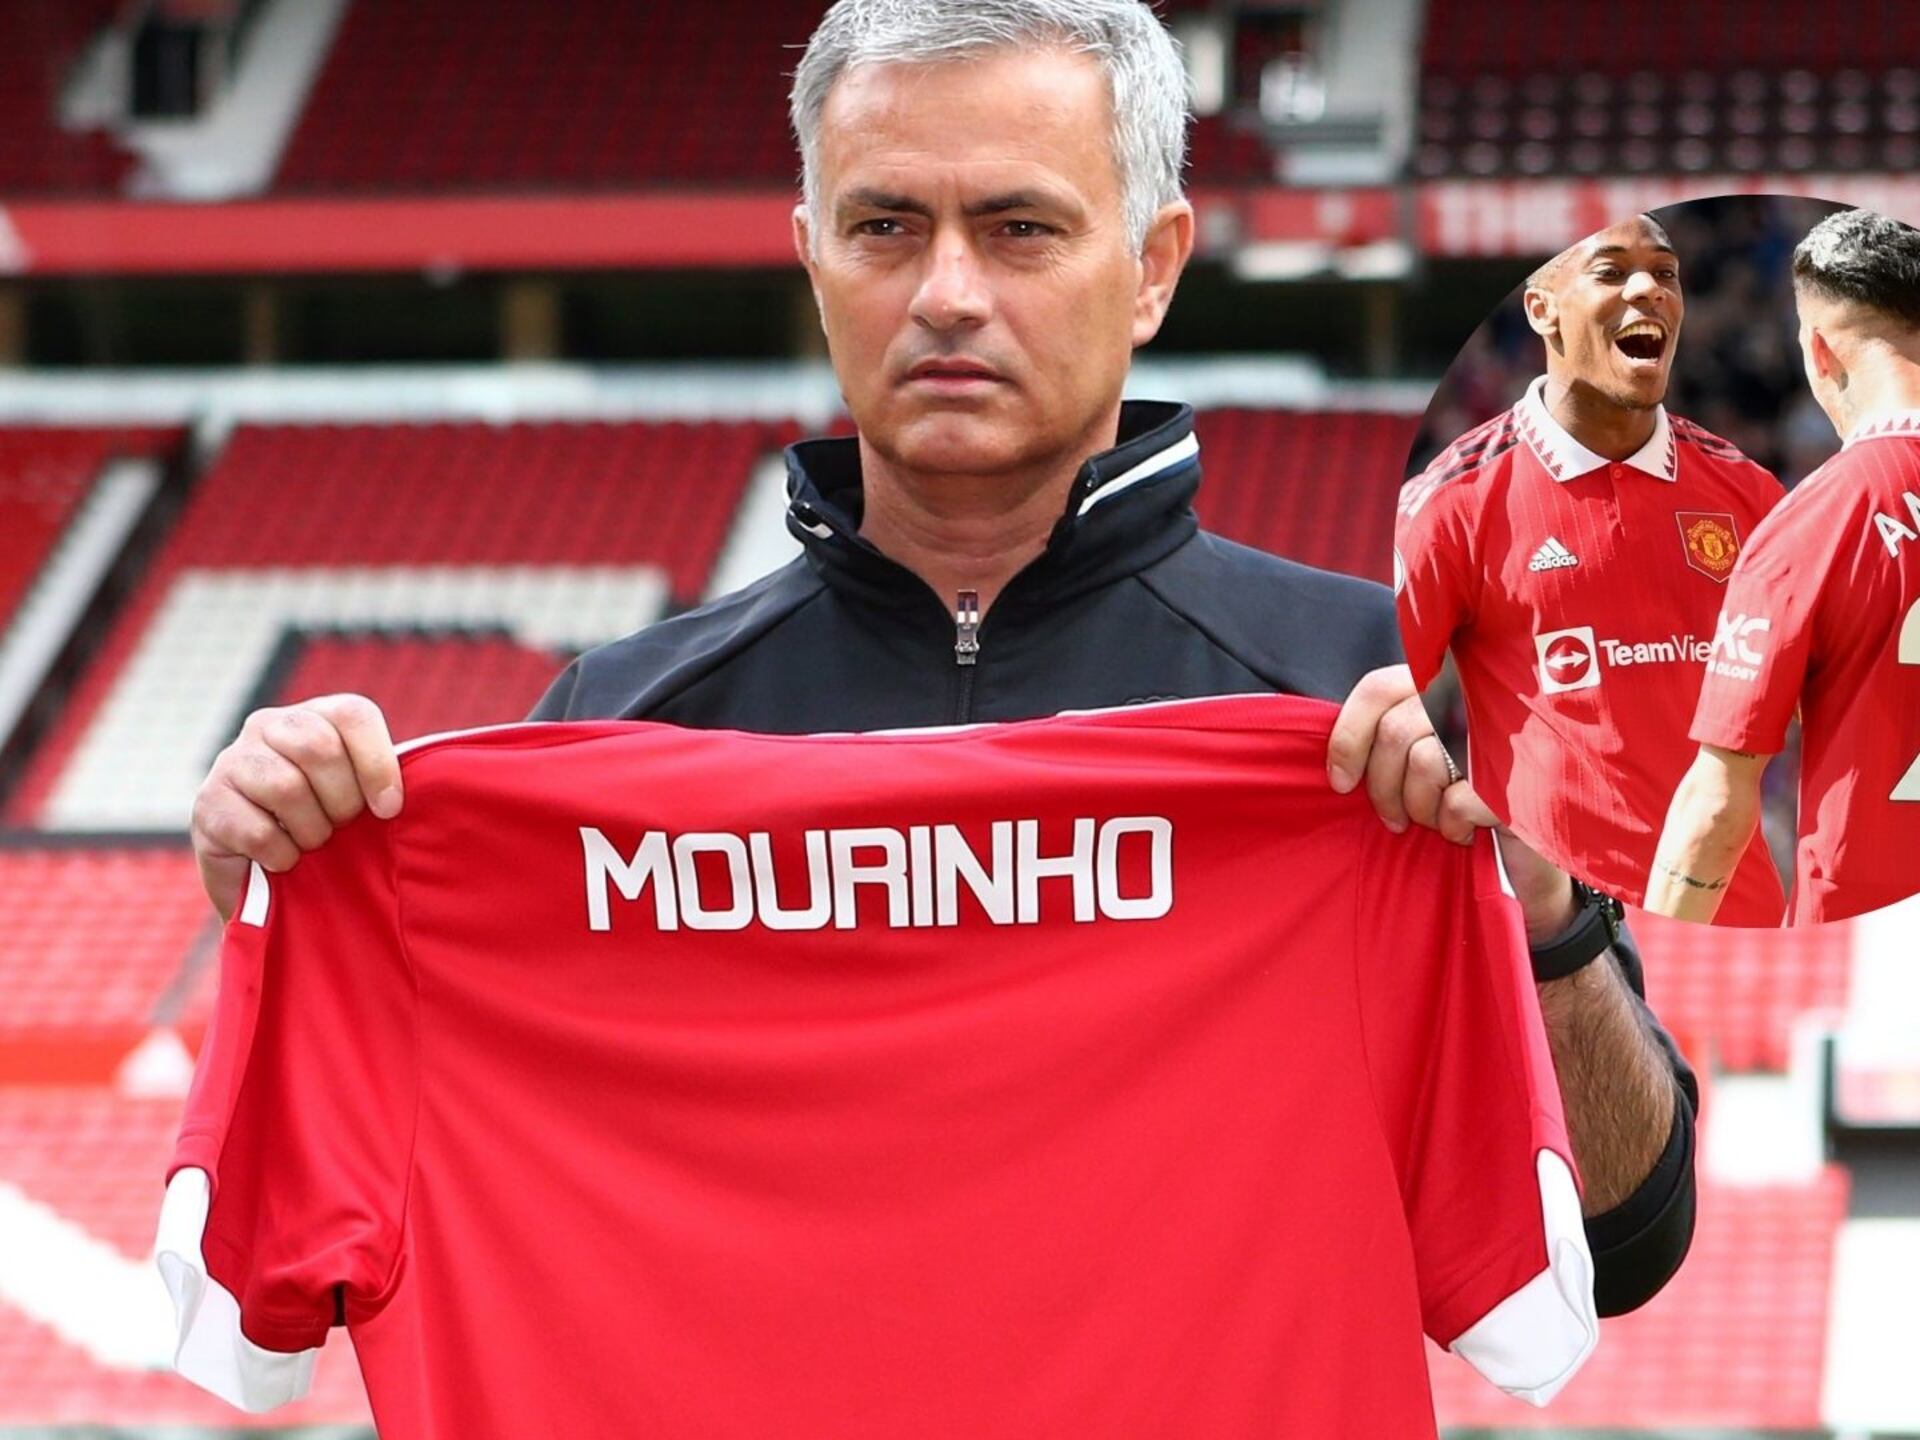 If Mourinho arrives at Man U, the first player to leave, and it's not Rashford